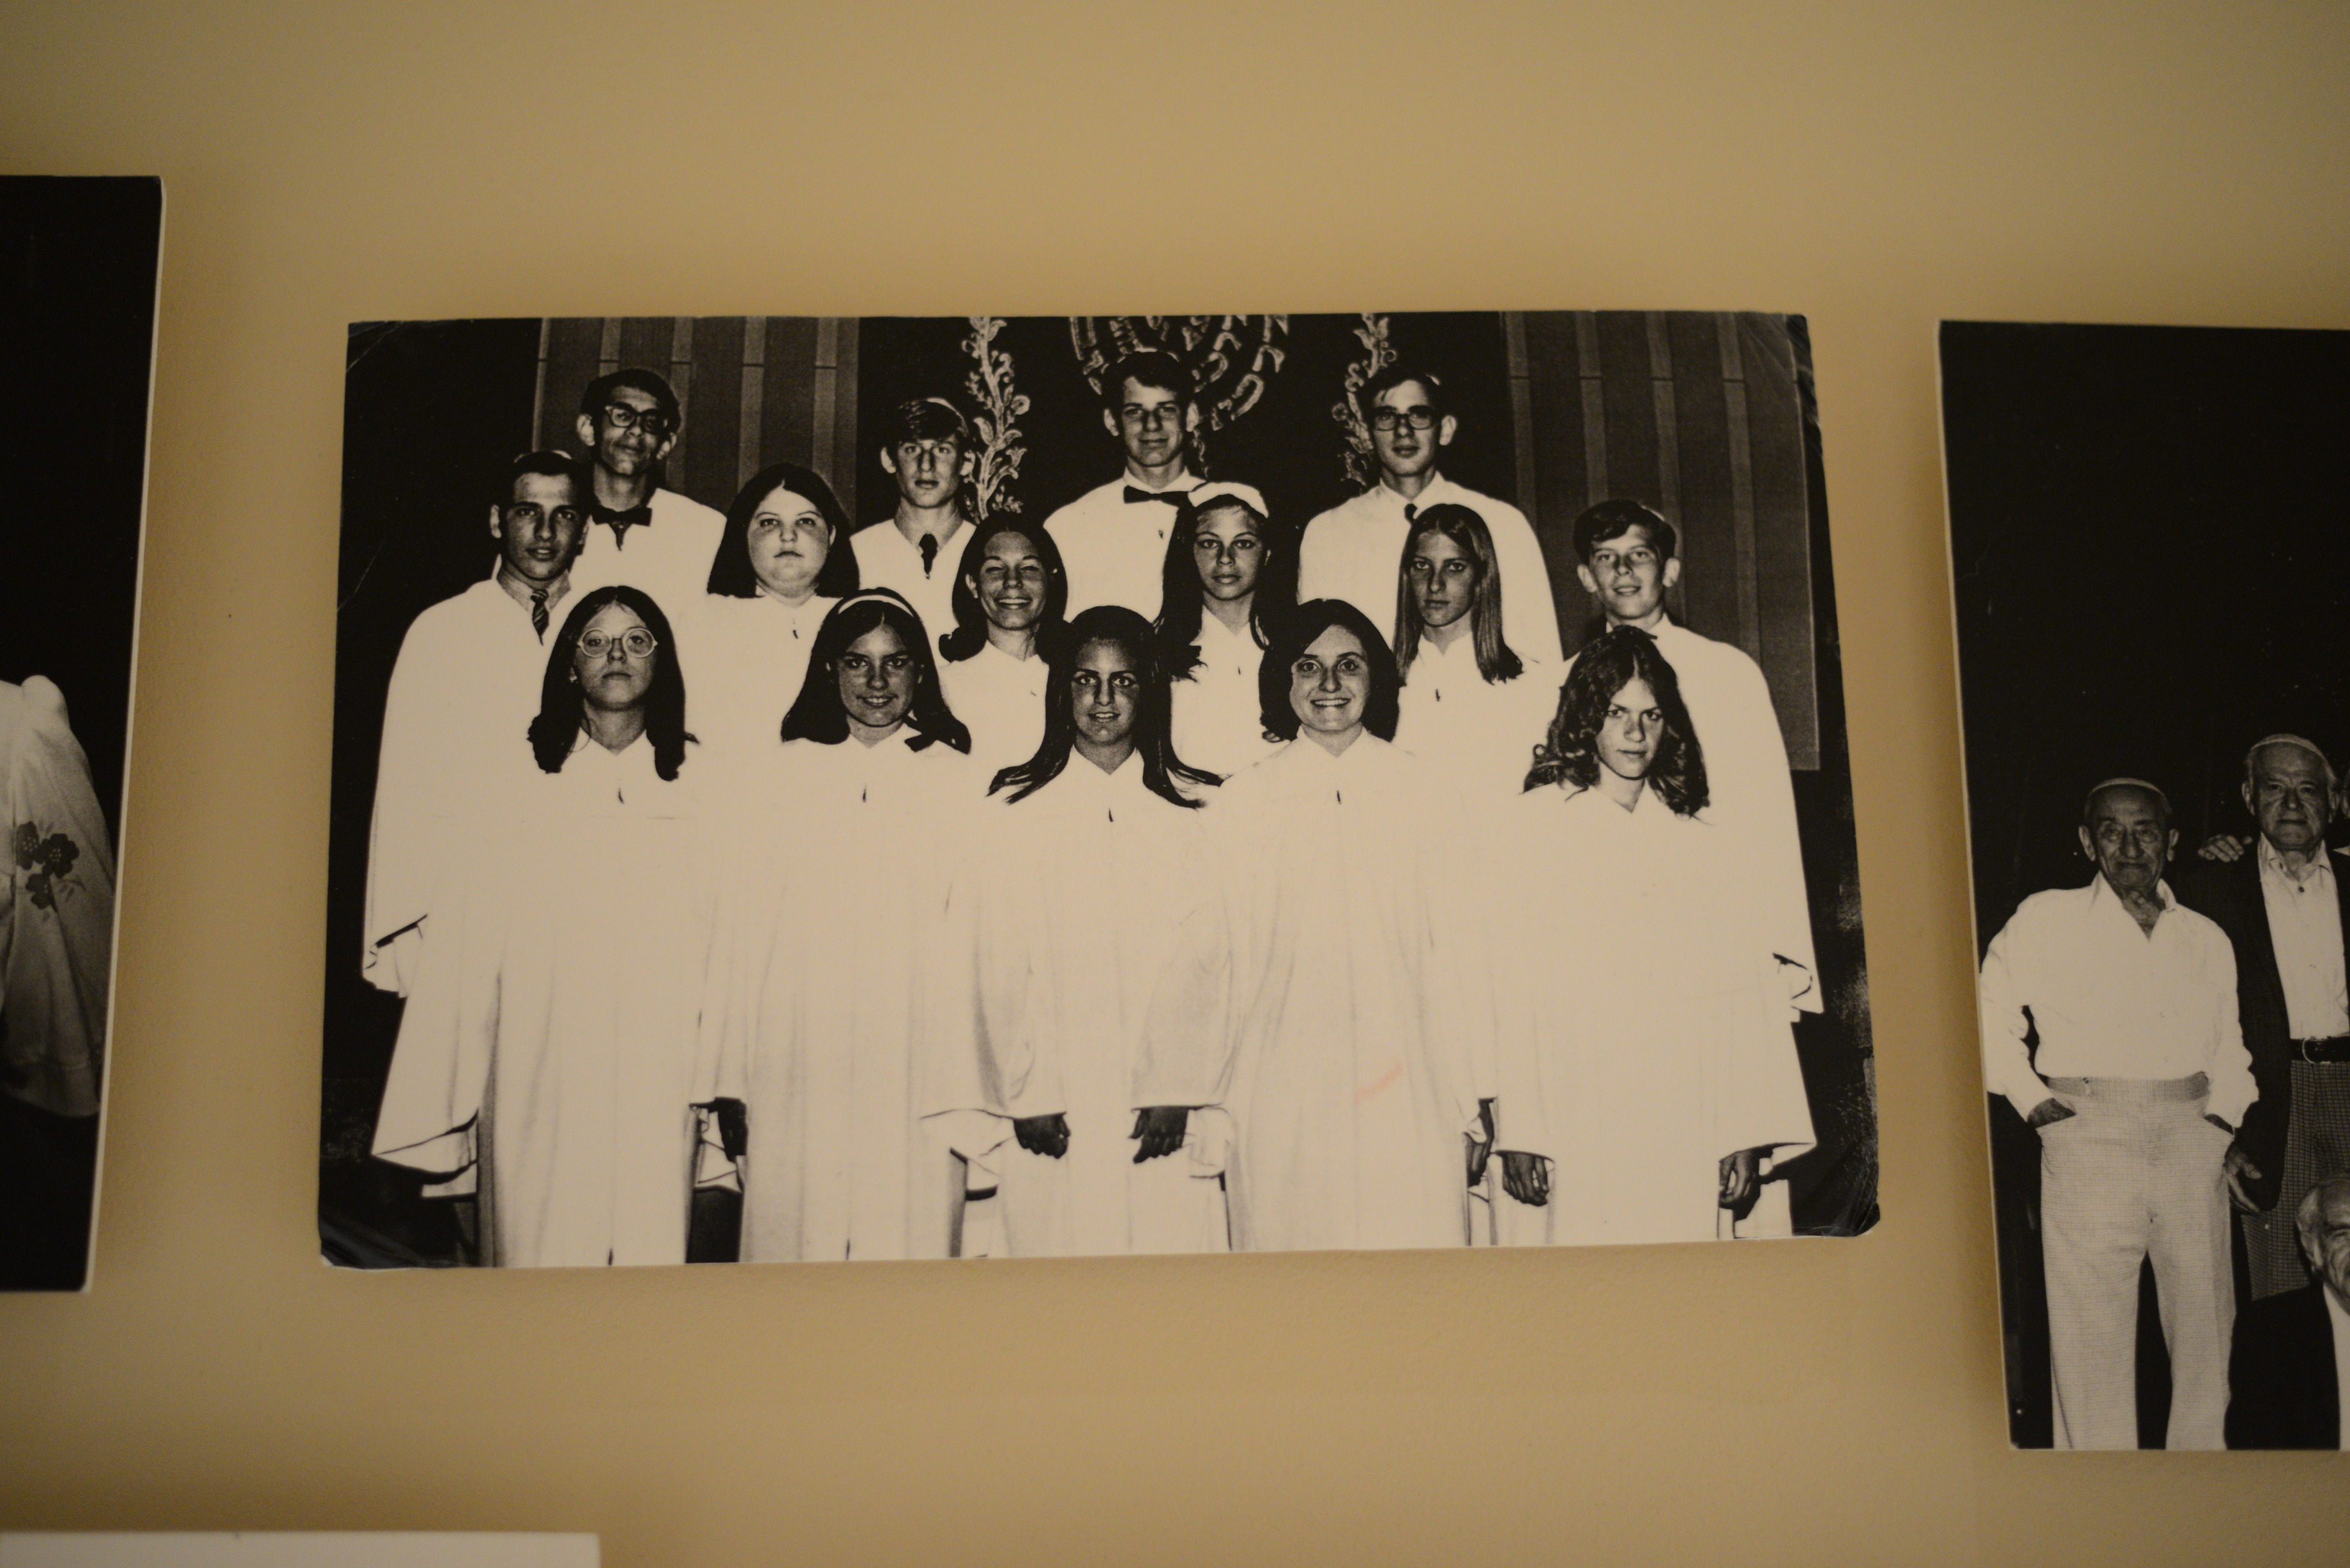 Photograph of a group of teenagers in robes, date unknown